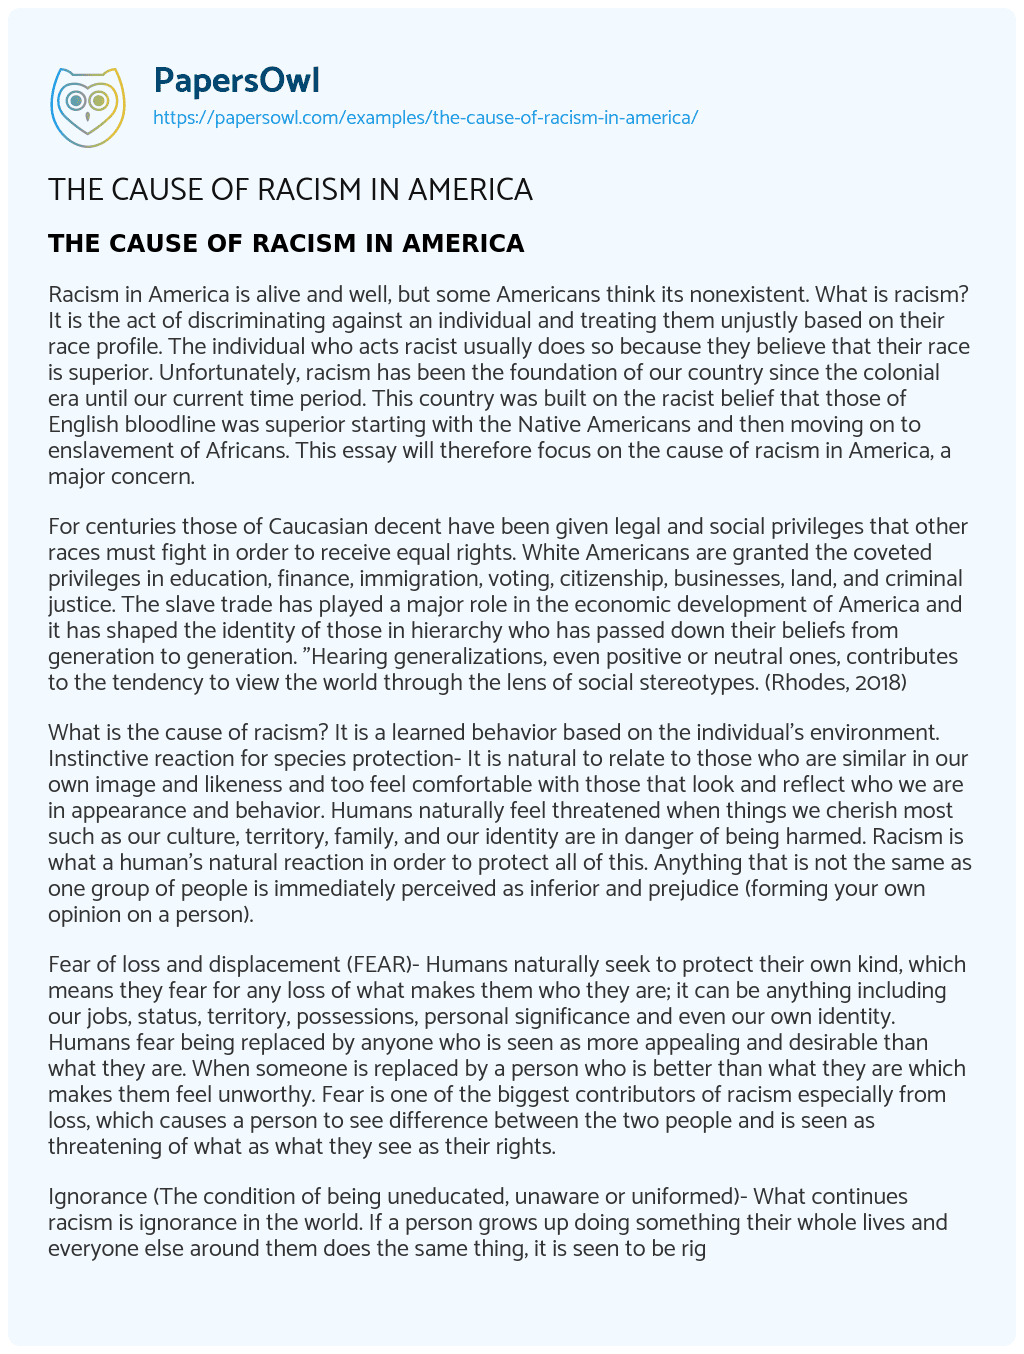 THE CAUSE of RACISM in AMERICA essay